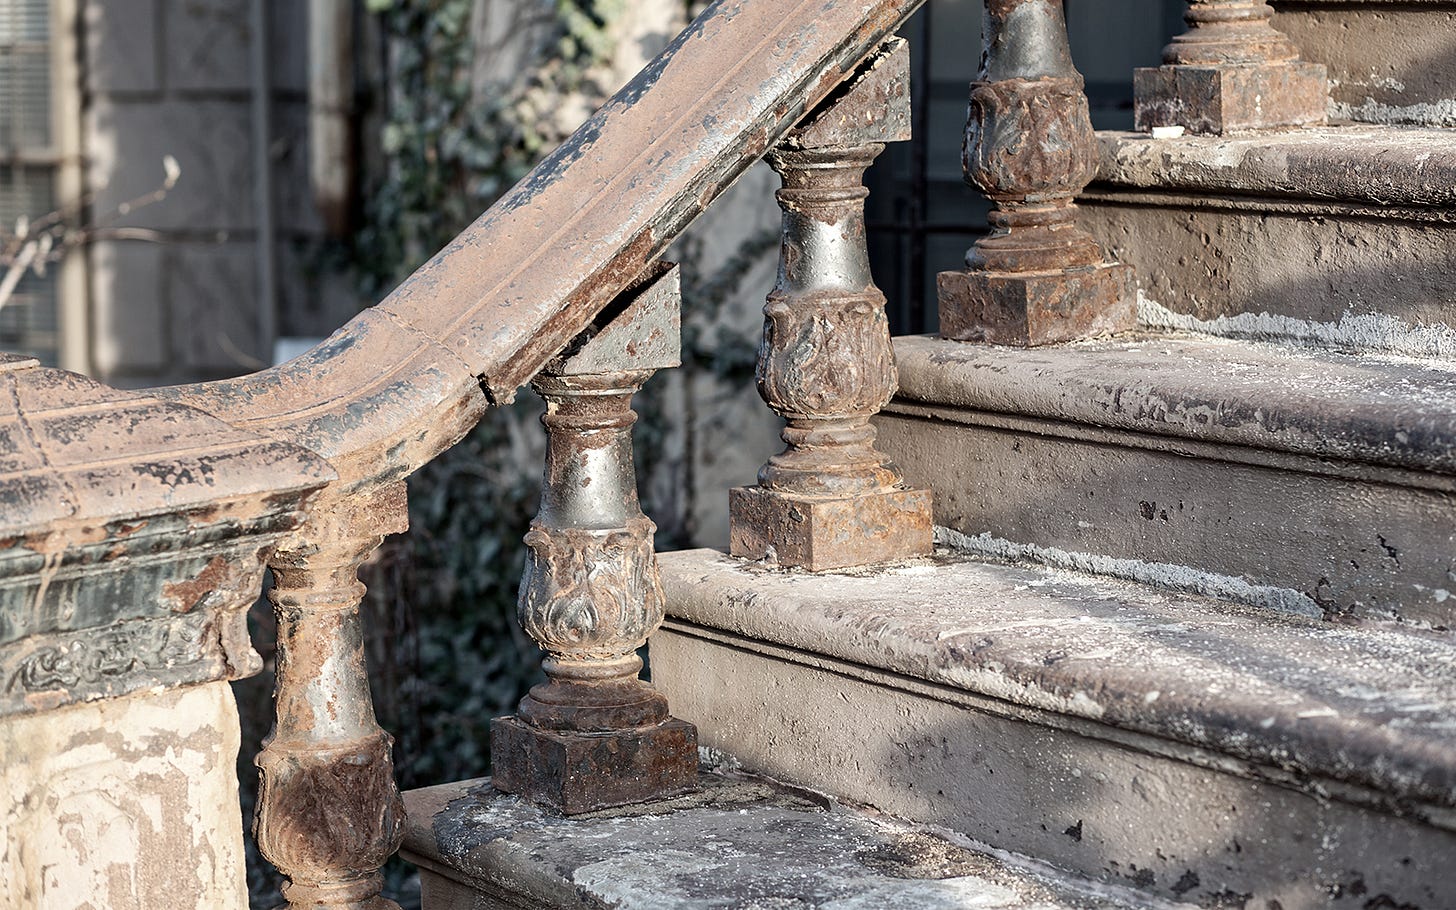 Old brownstone steps with ancient railing. The sun burns away the rust and grime.